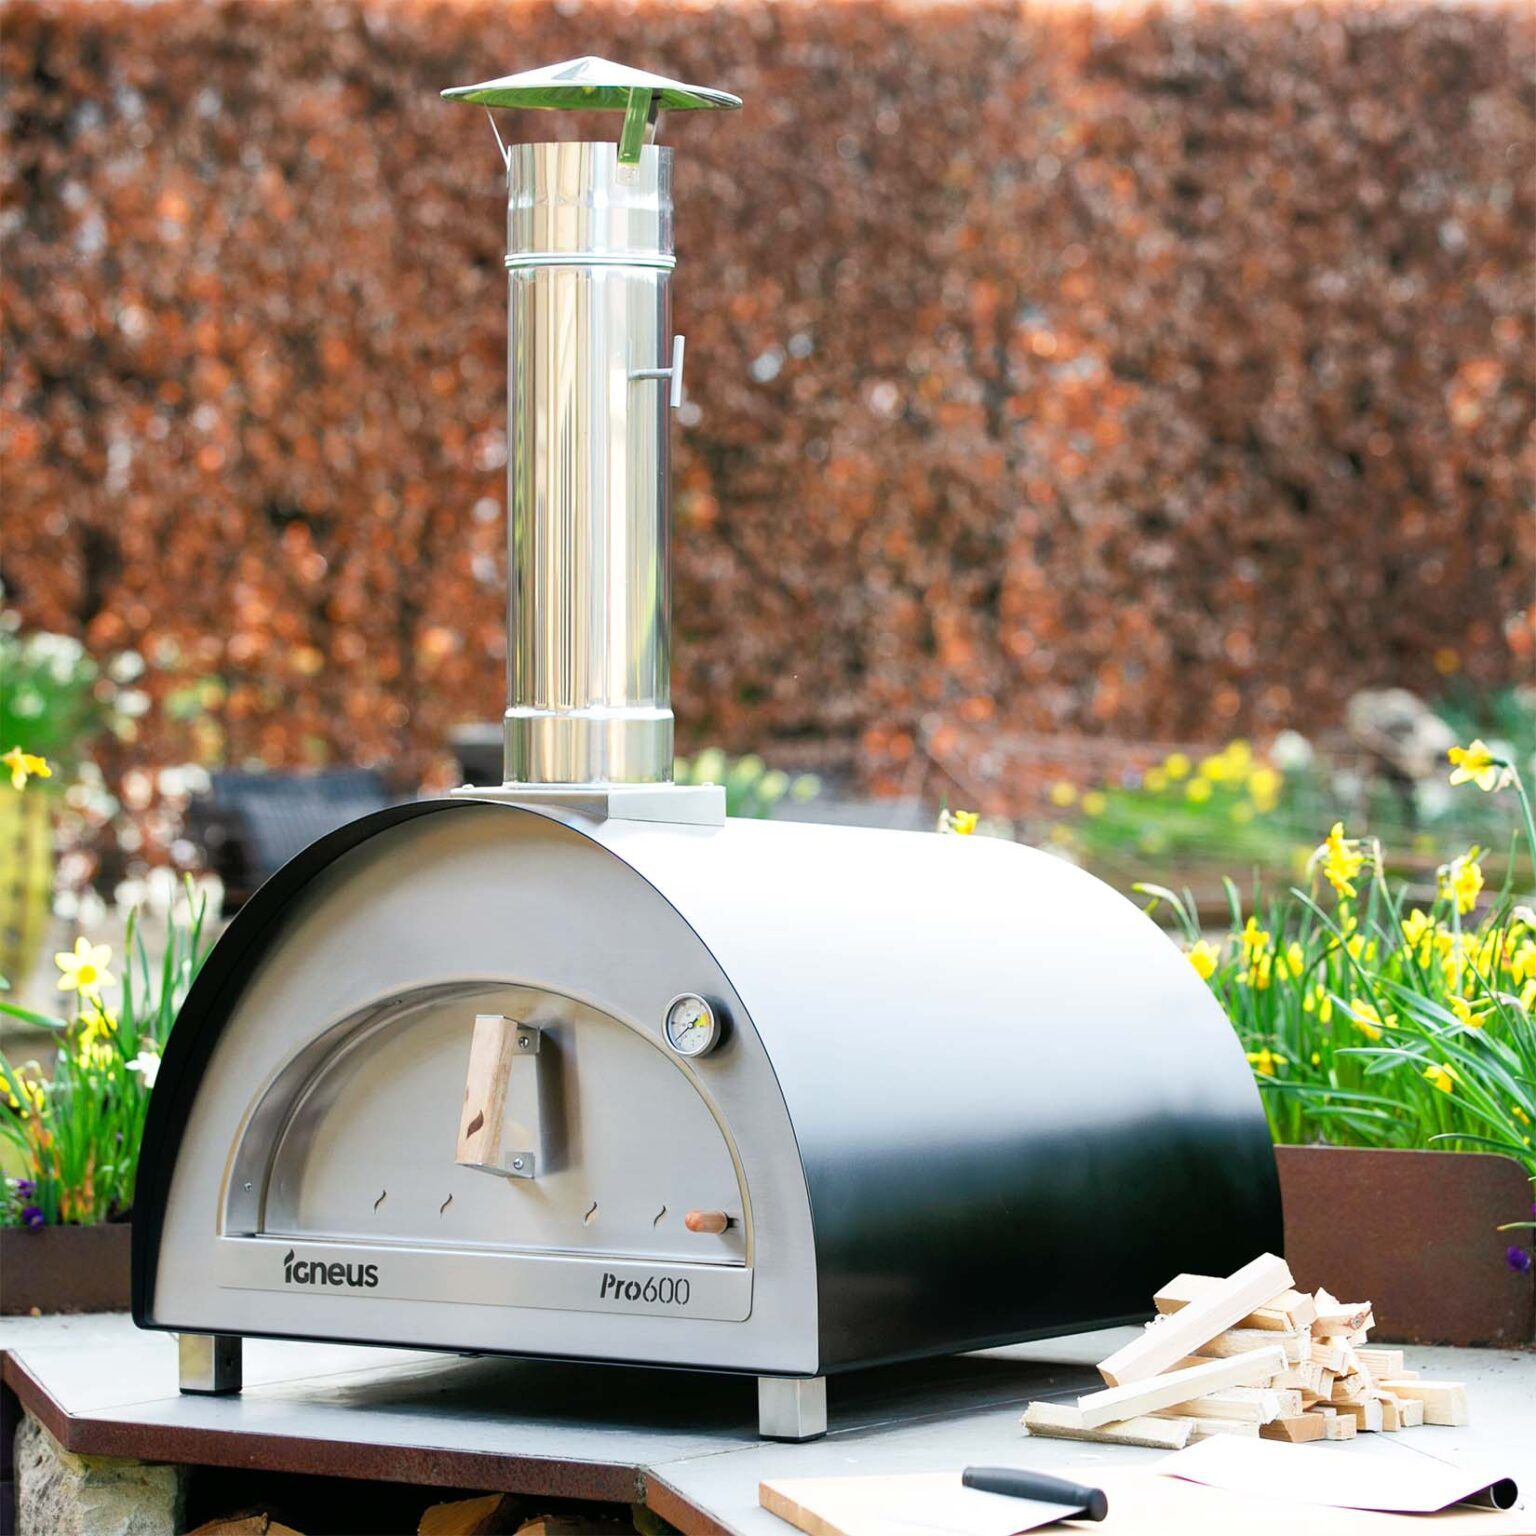 Igneus Pro 600 wood fired pizza oven - Igneus wood fired pizza ovens